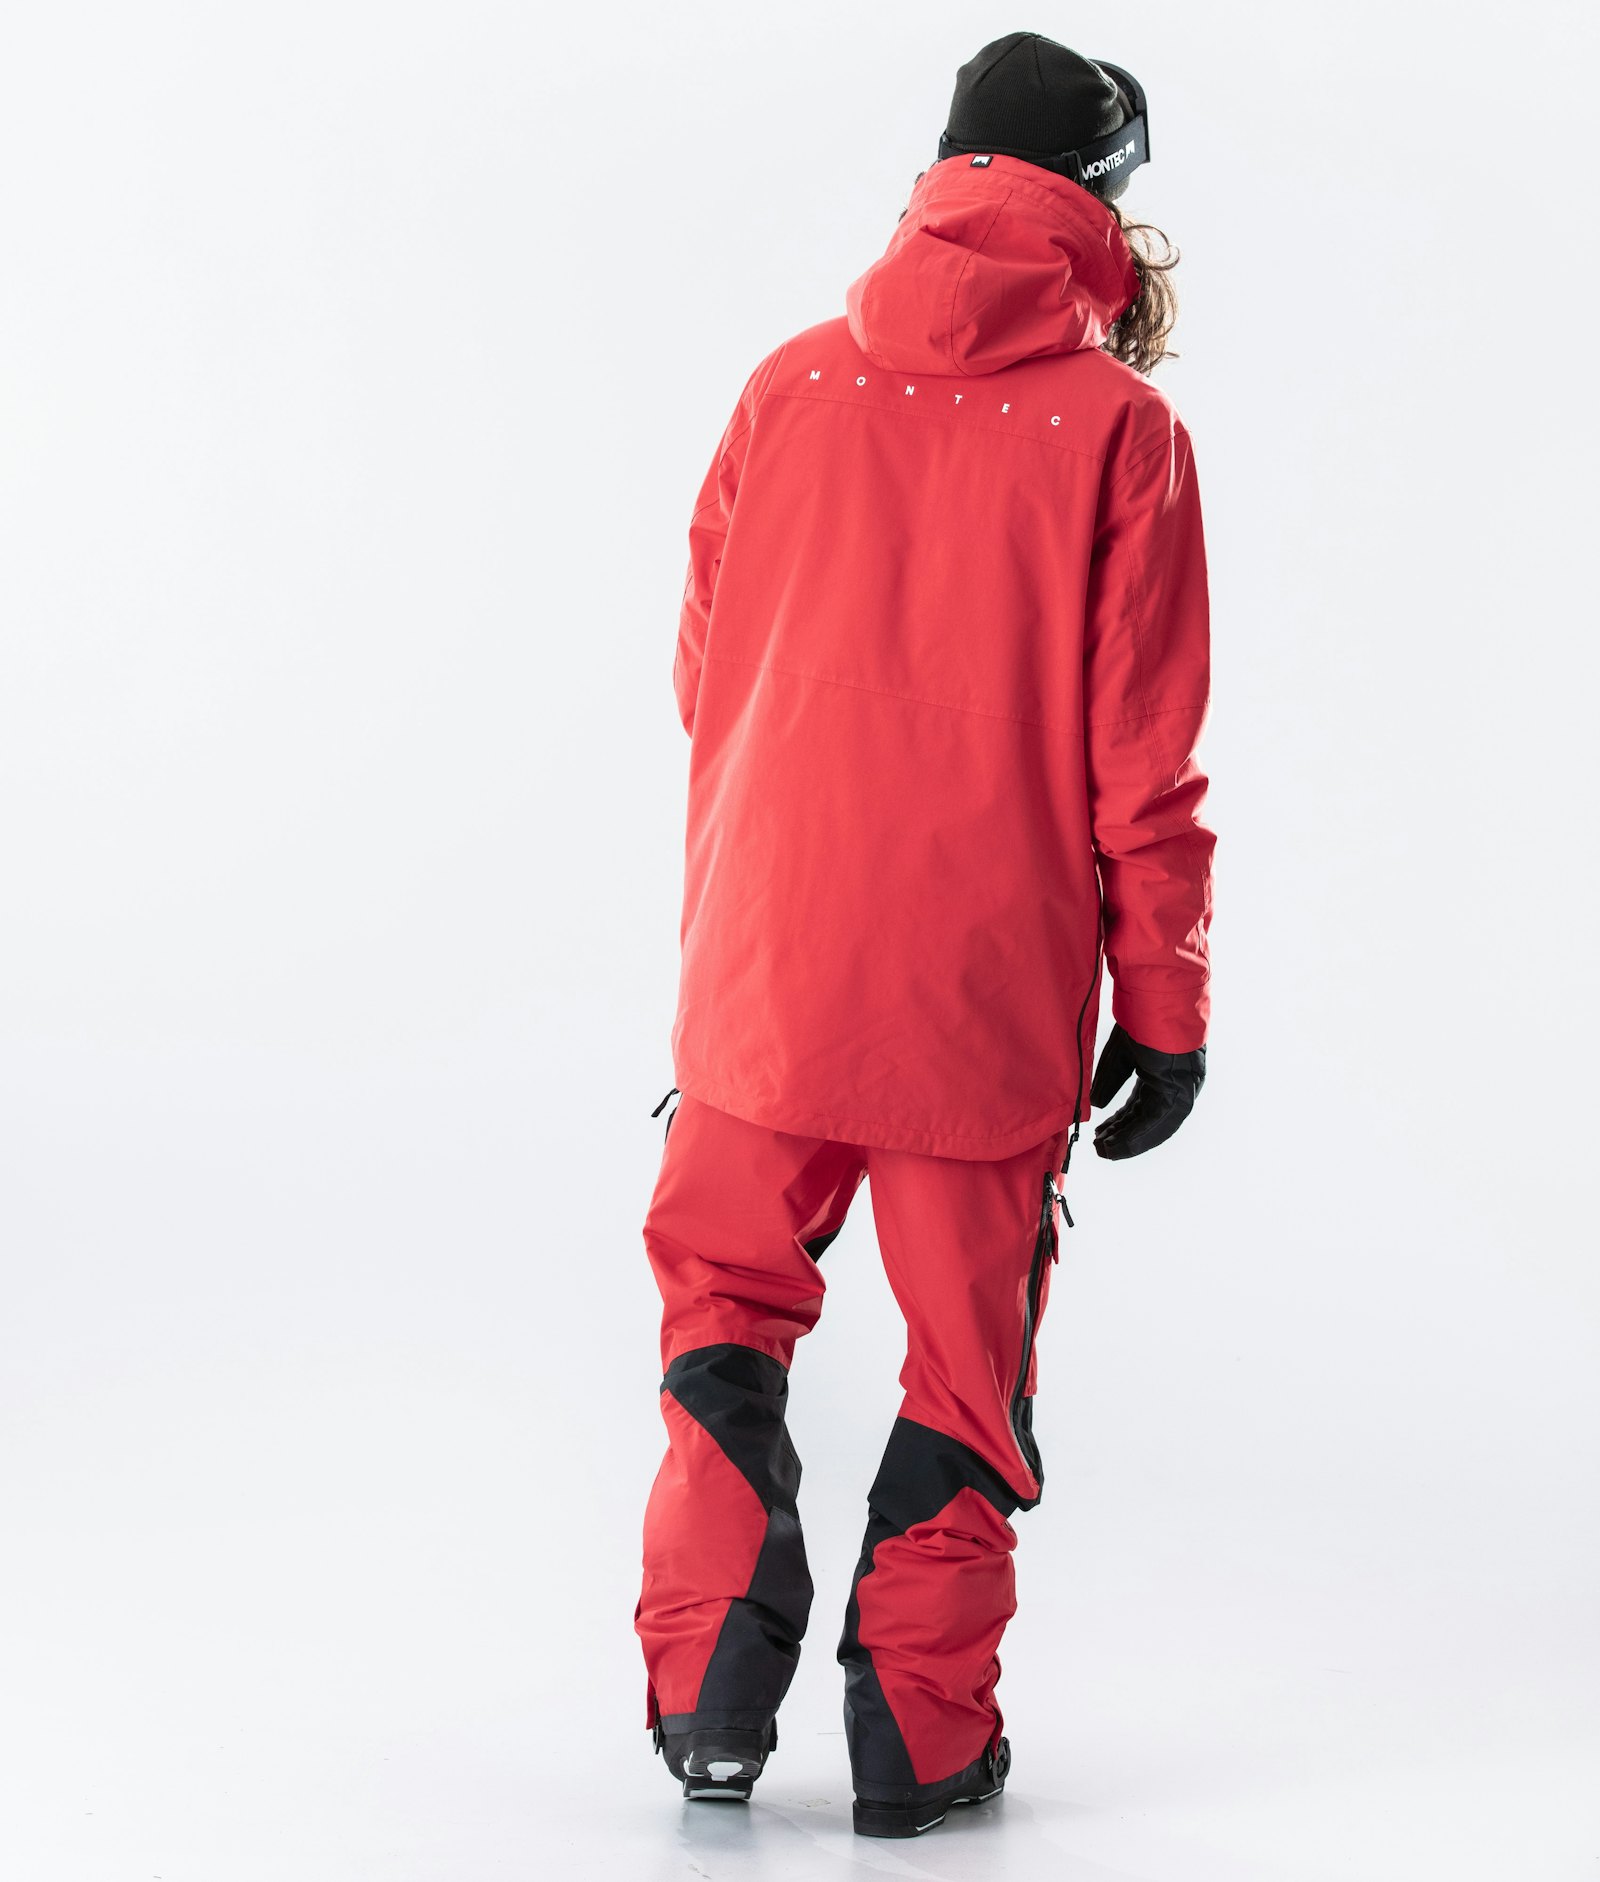 Dune 2020 Giacca Sci Uomo Red